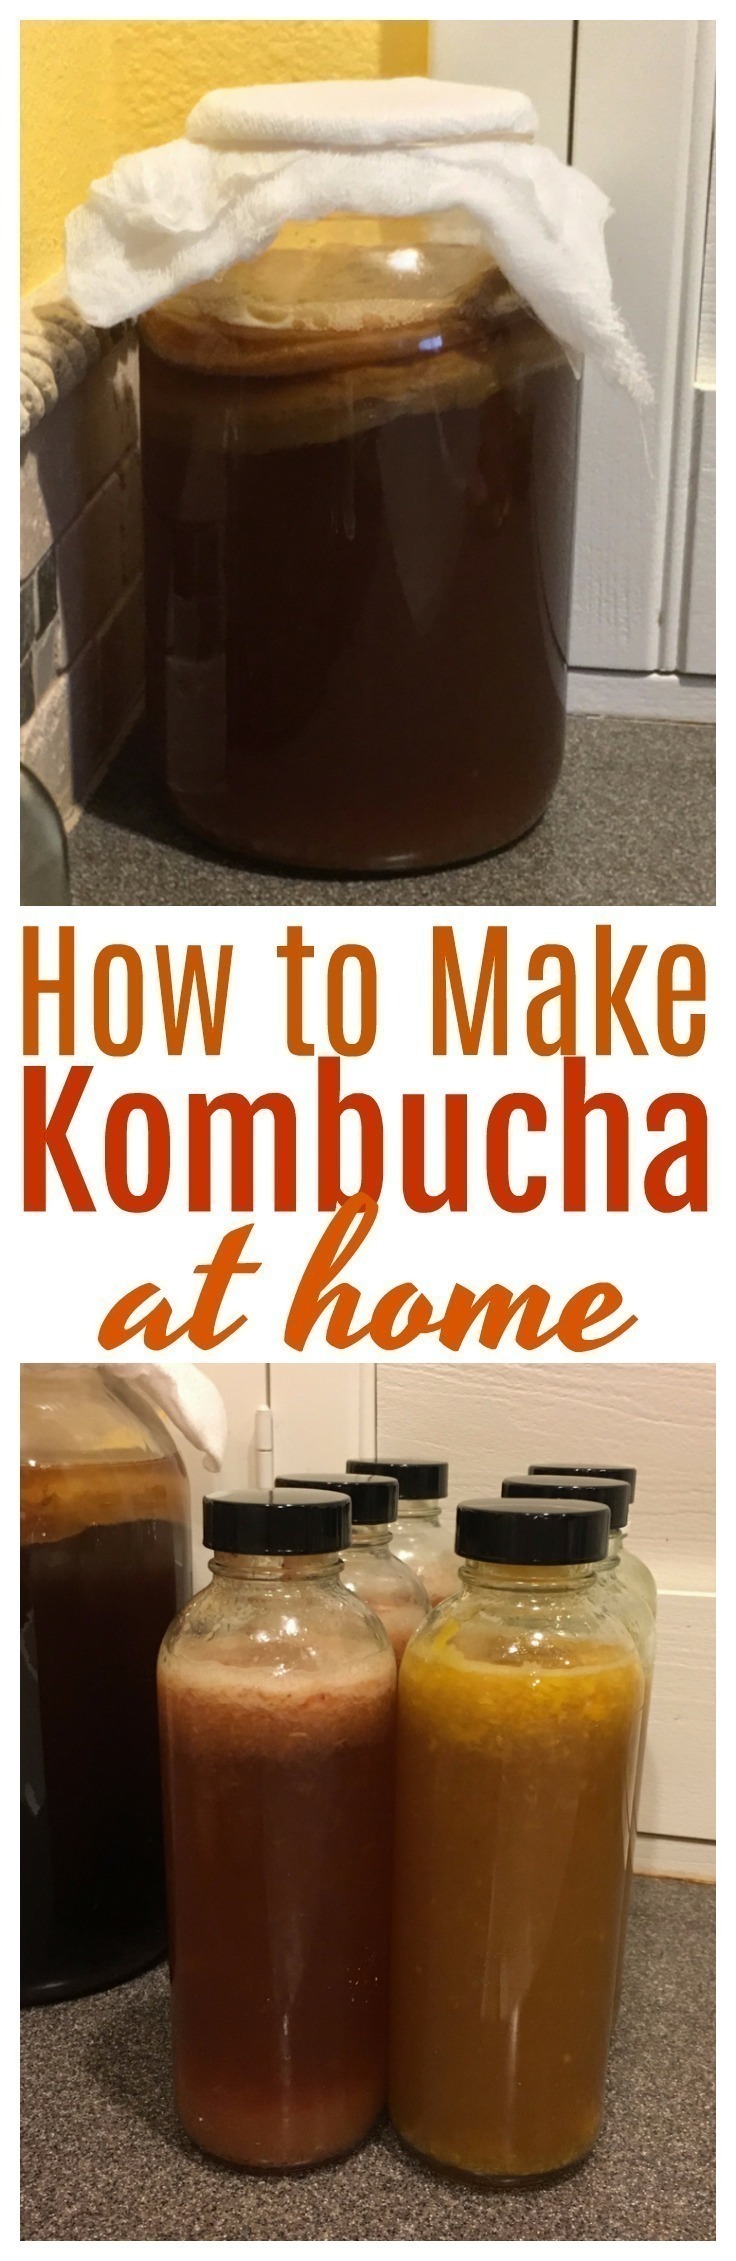 Kombucha is a fermented probiotic beverage of black or green tea and sugar, that can be easily made at home with a tremendous cost savings. #probiotic | #fermented | #kombucha